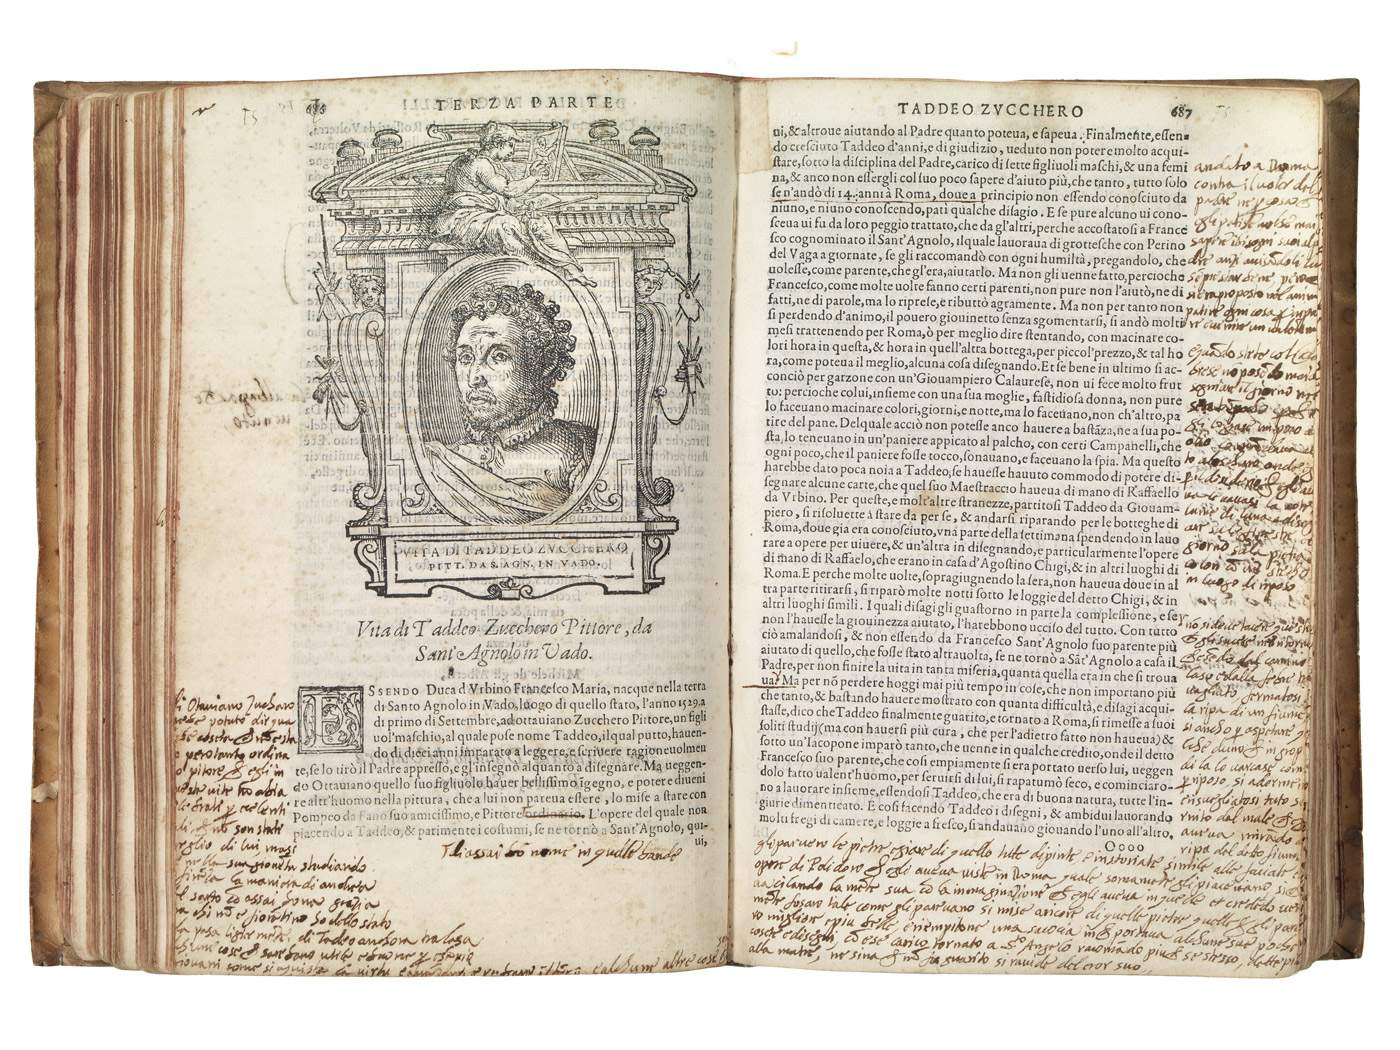 Rare first edition of Vasari's Lives at auction, with notes by Federico Zuccari 